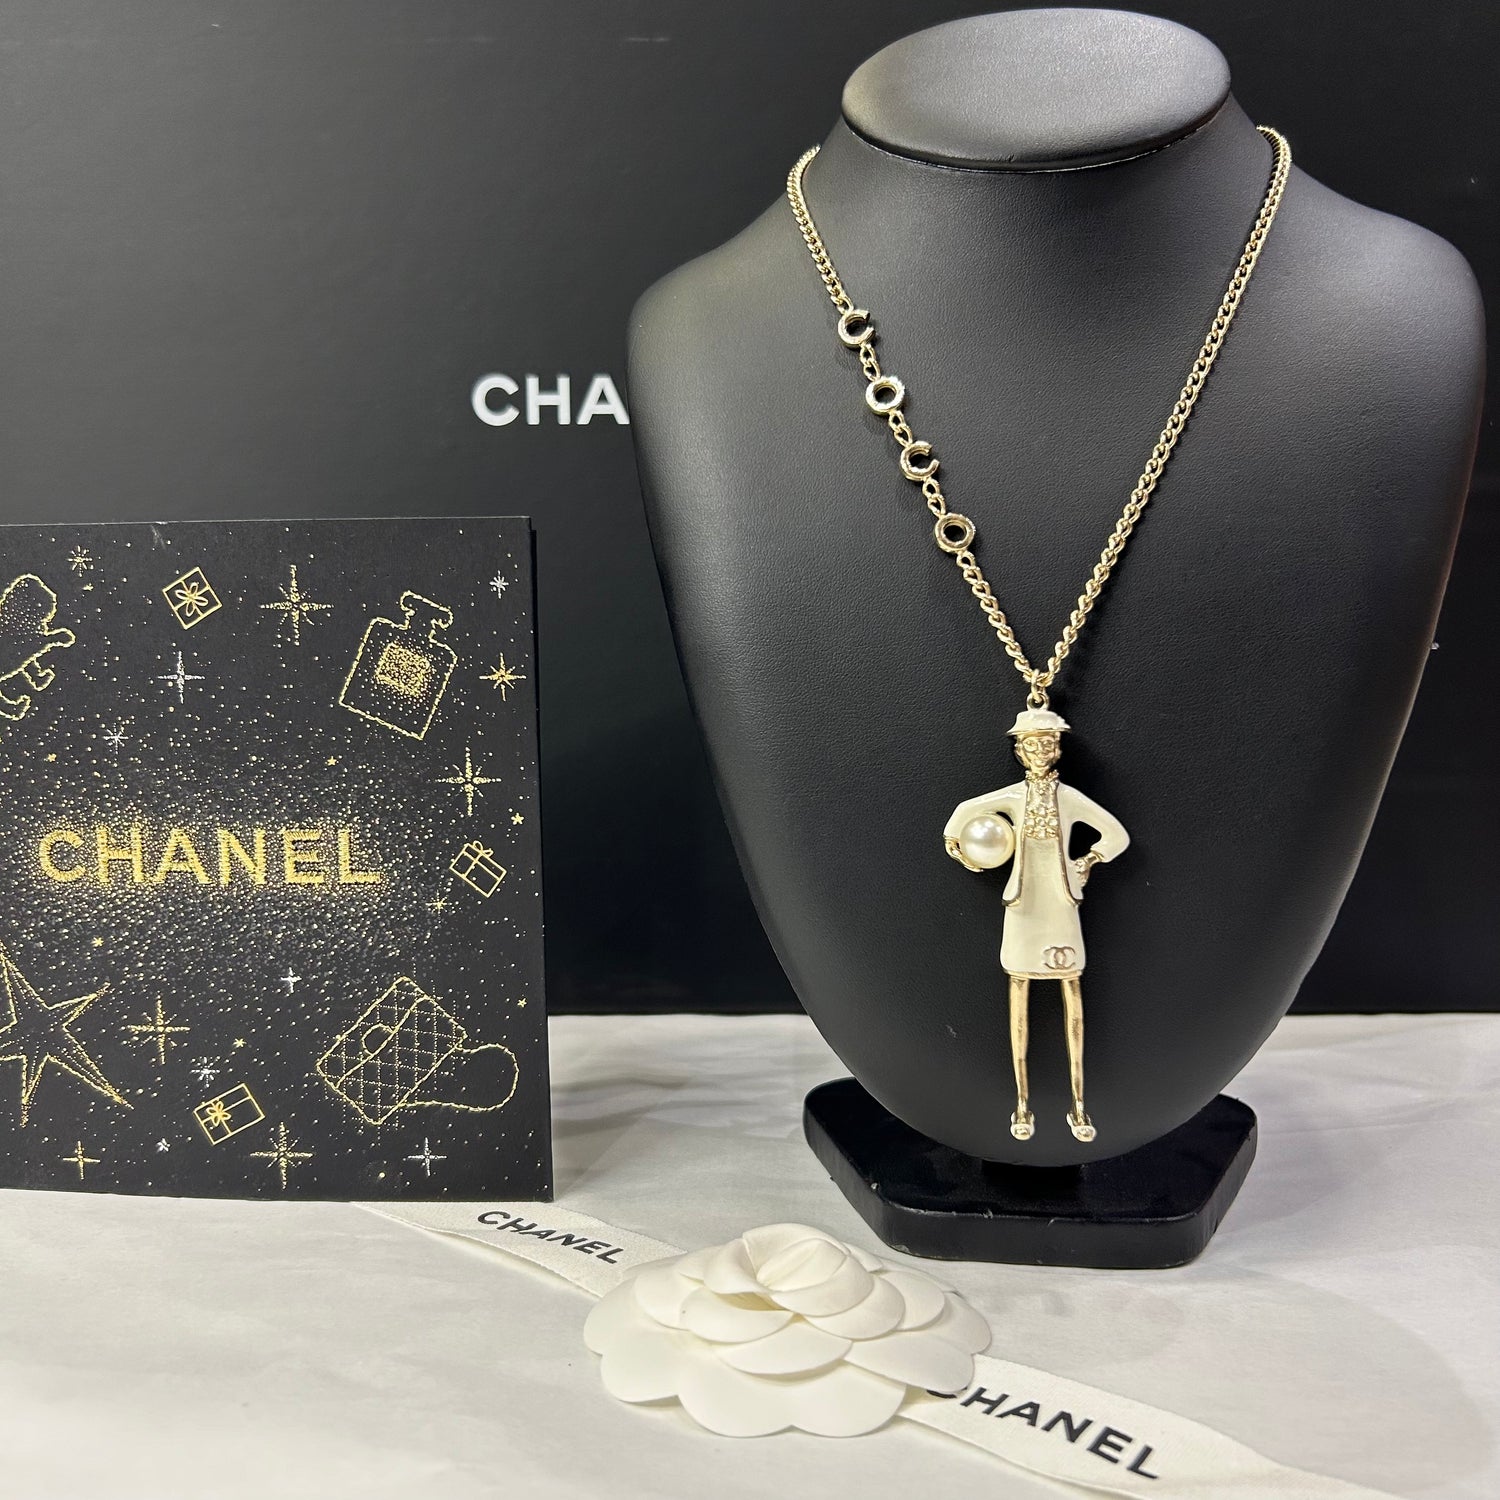 Chanel - Coco Chanel long necklace